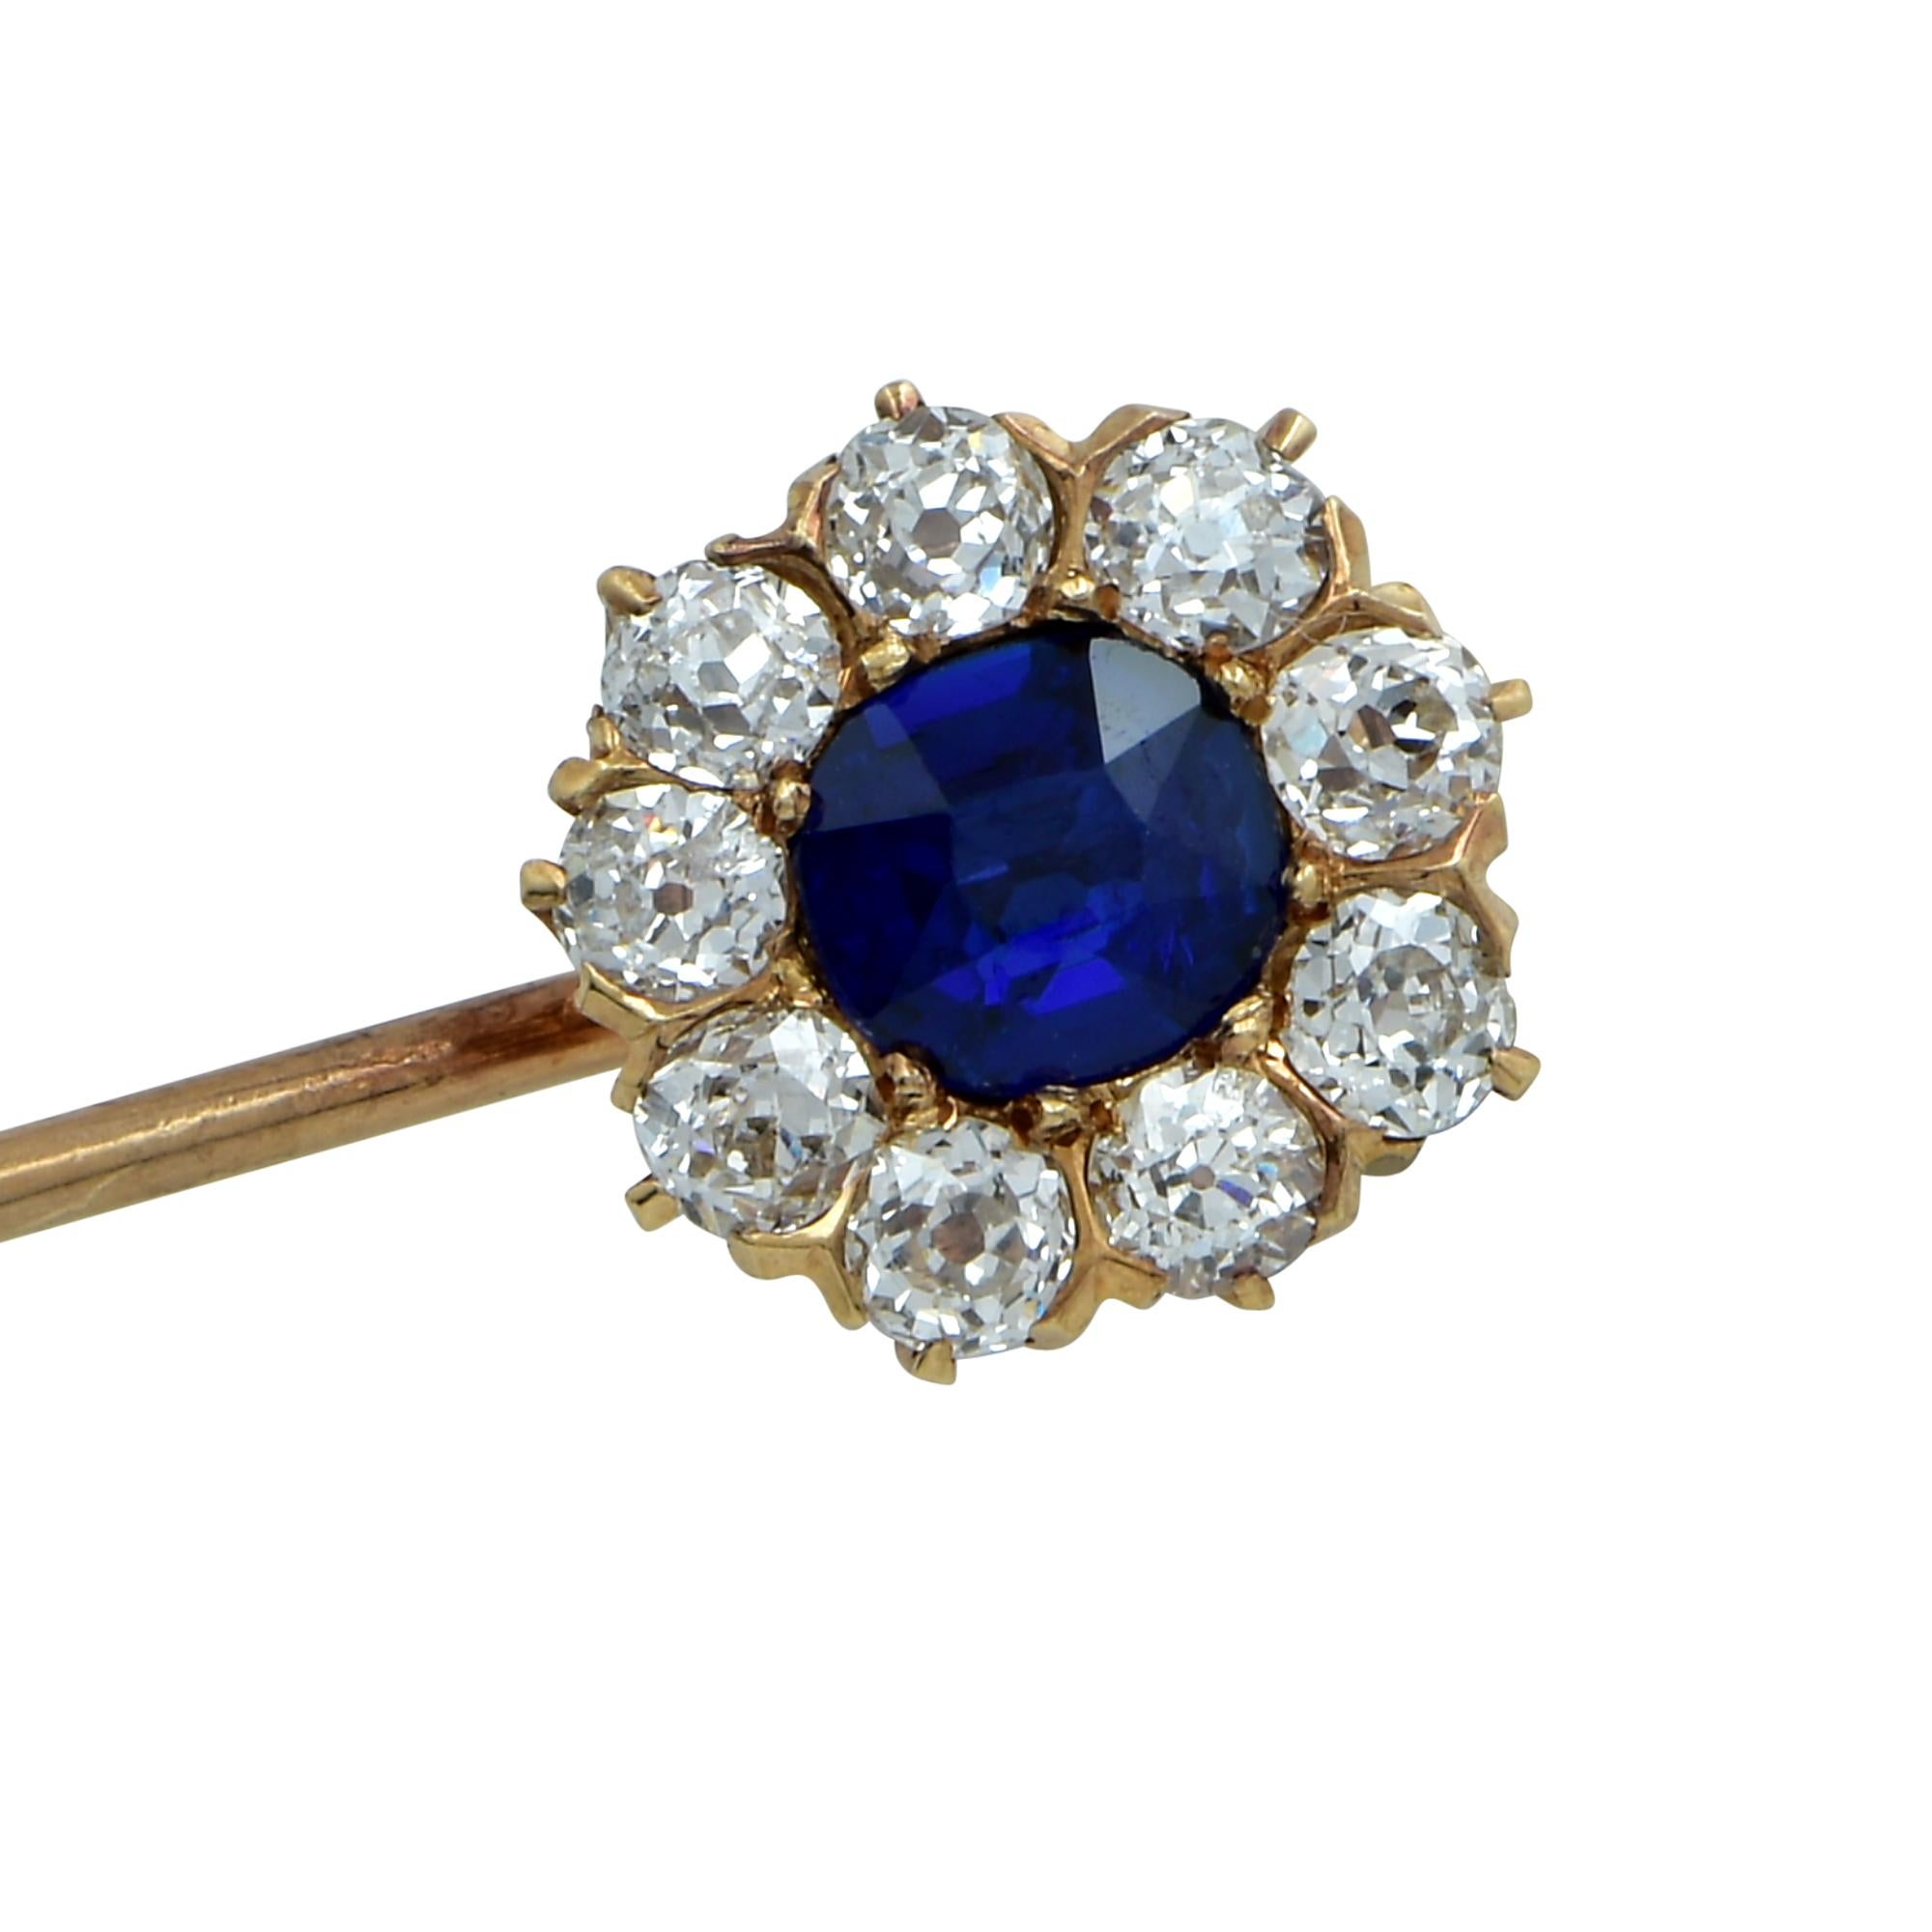 Gorgeous Victorian brooch pin crafted in 18K yellow gold, showcasing a stunning AGL Certified non-heated blue Cushion Cut Sapphire originating in Cambodia, surrounded by nine Old European Cut diamonds weighing .80 carats total, G color, VS clarity.